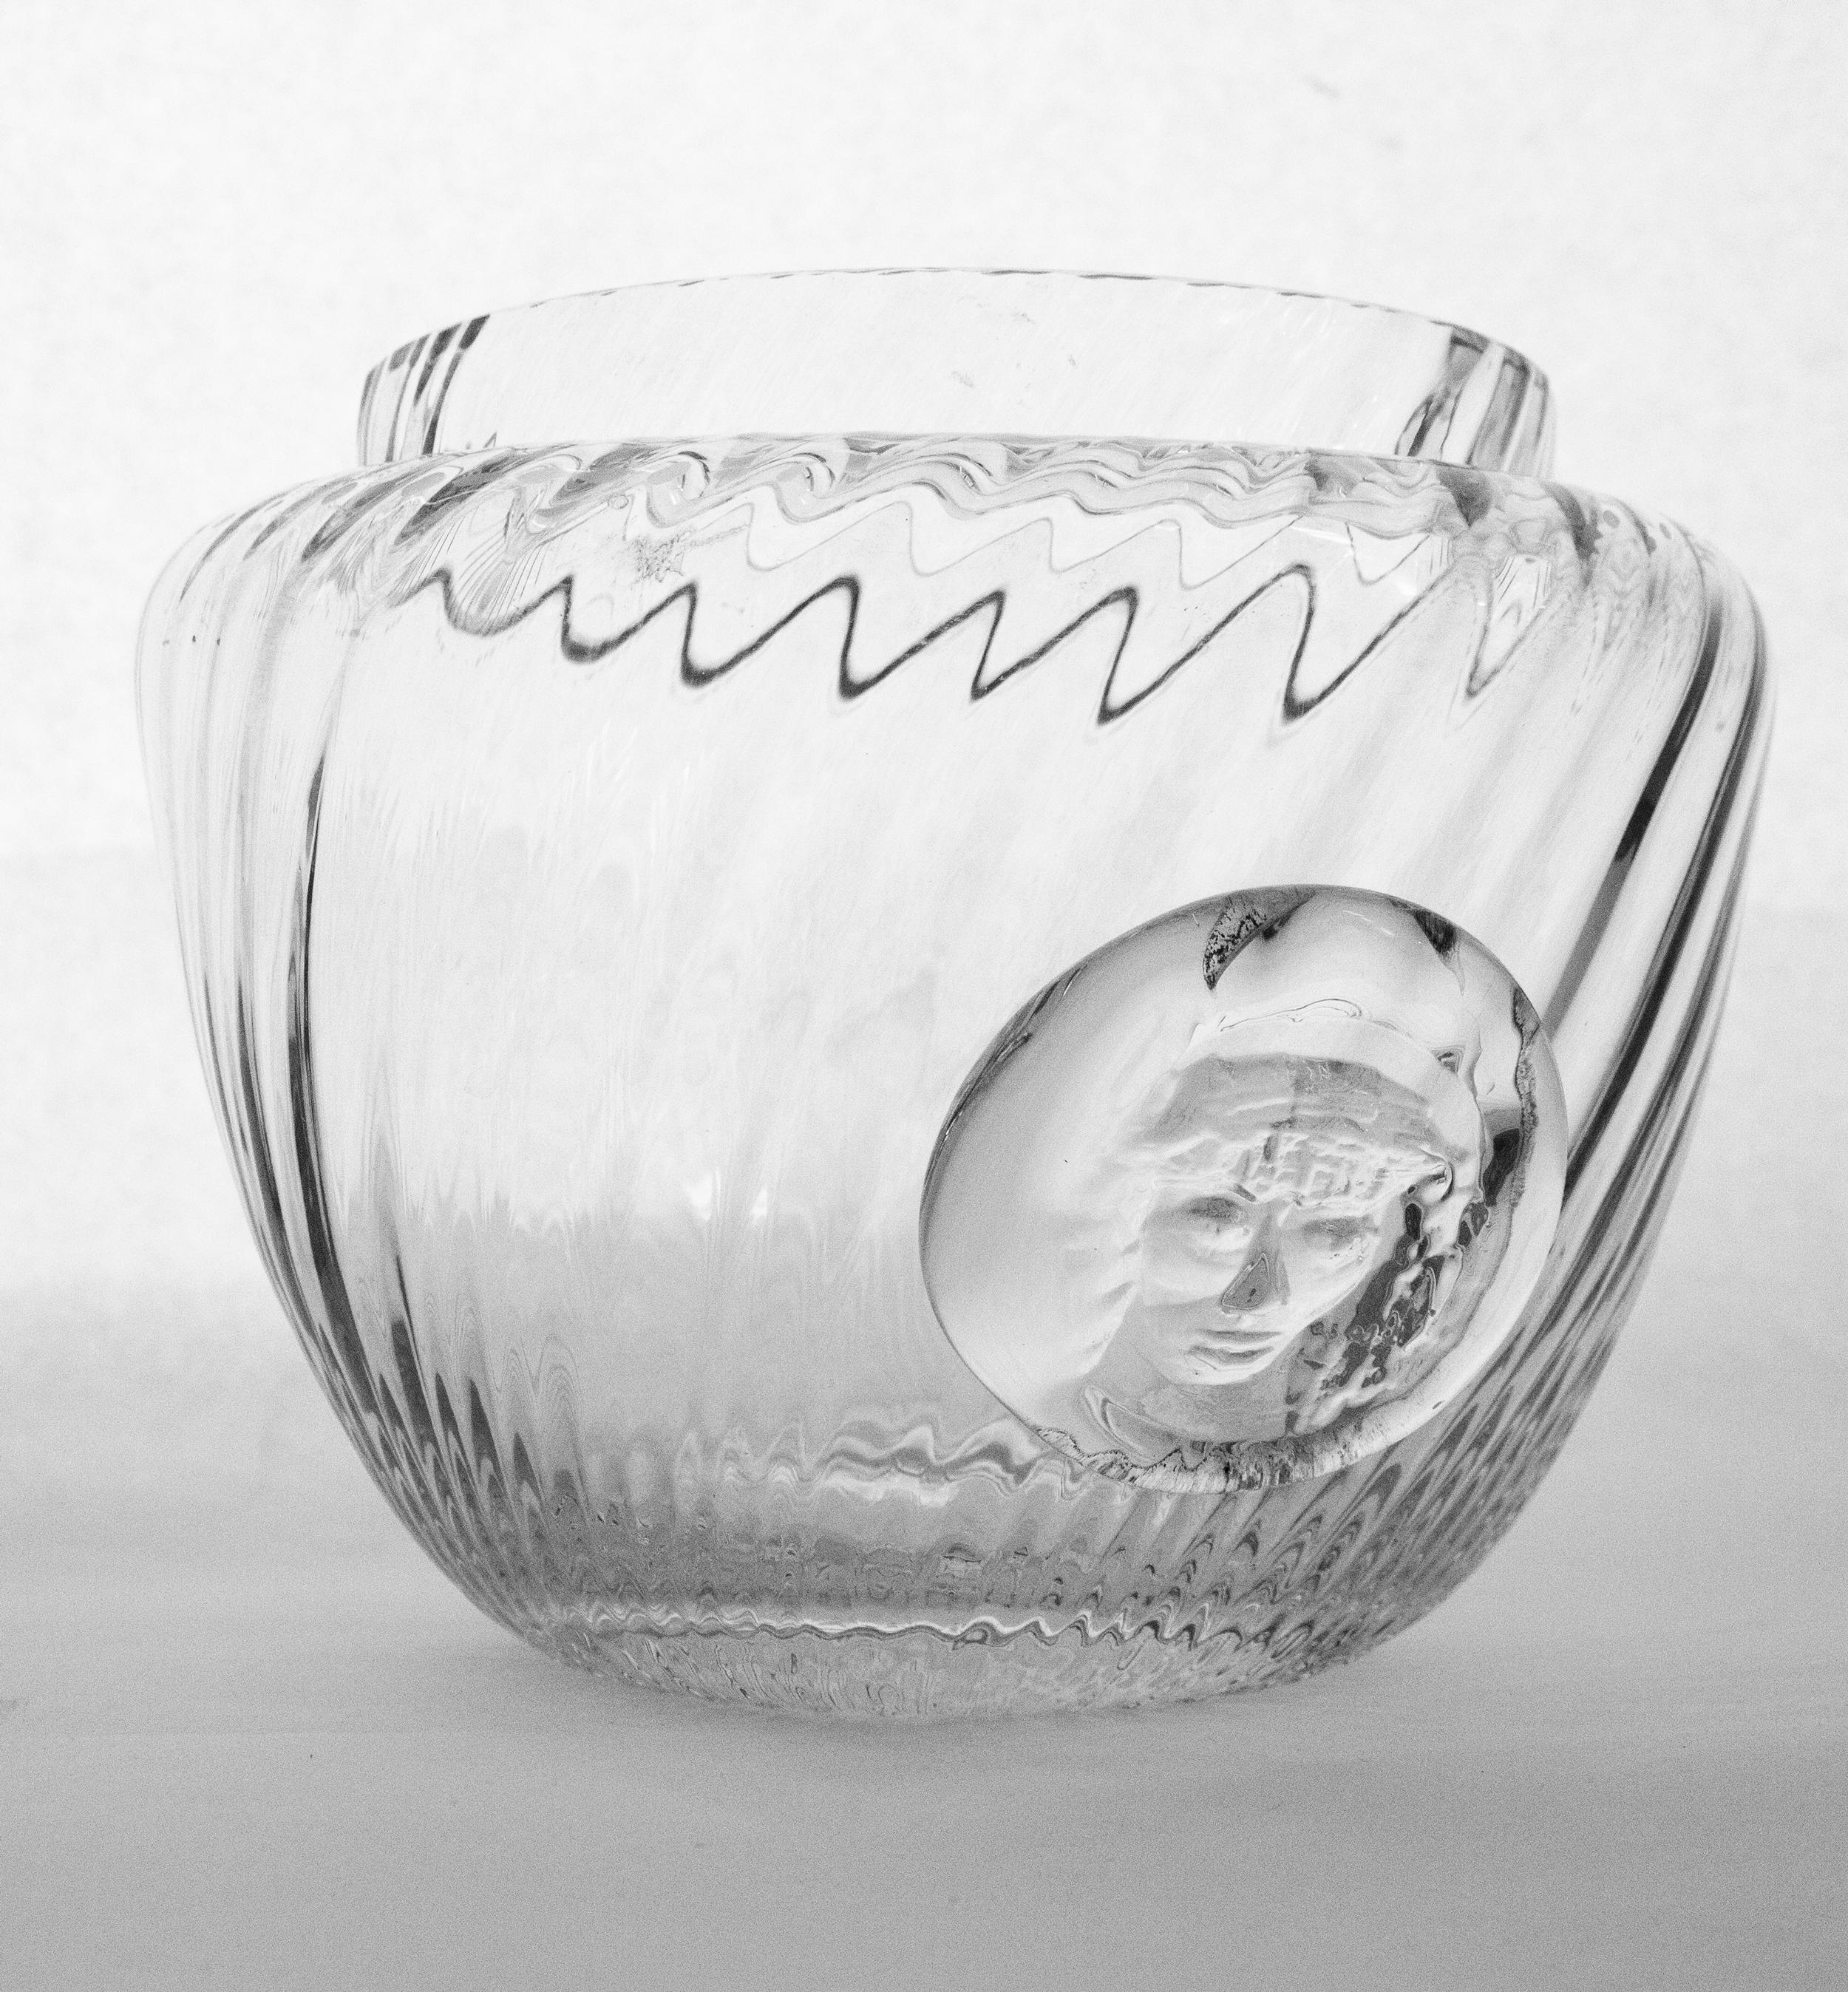 Large Turbine glass bowl by the Swedish artist Erik Höglund, 1980.
Erik Höglund, 1932-1998, was a Swedish sculptor and glass artist, commonly known for his thick and bubbly glass manufactured for Boda. This large bowl is an unique piece. There